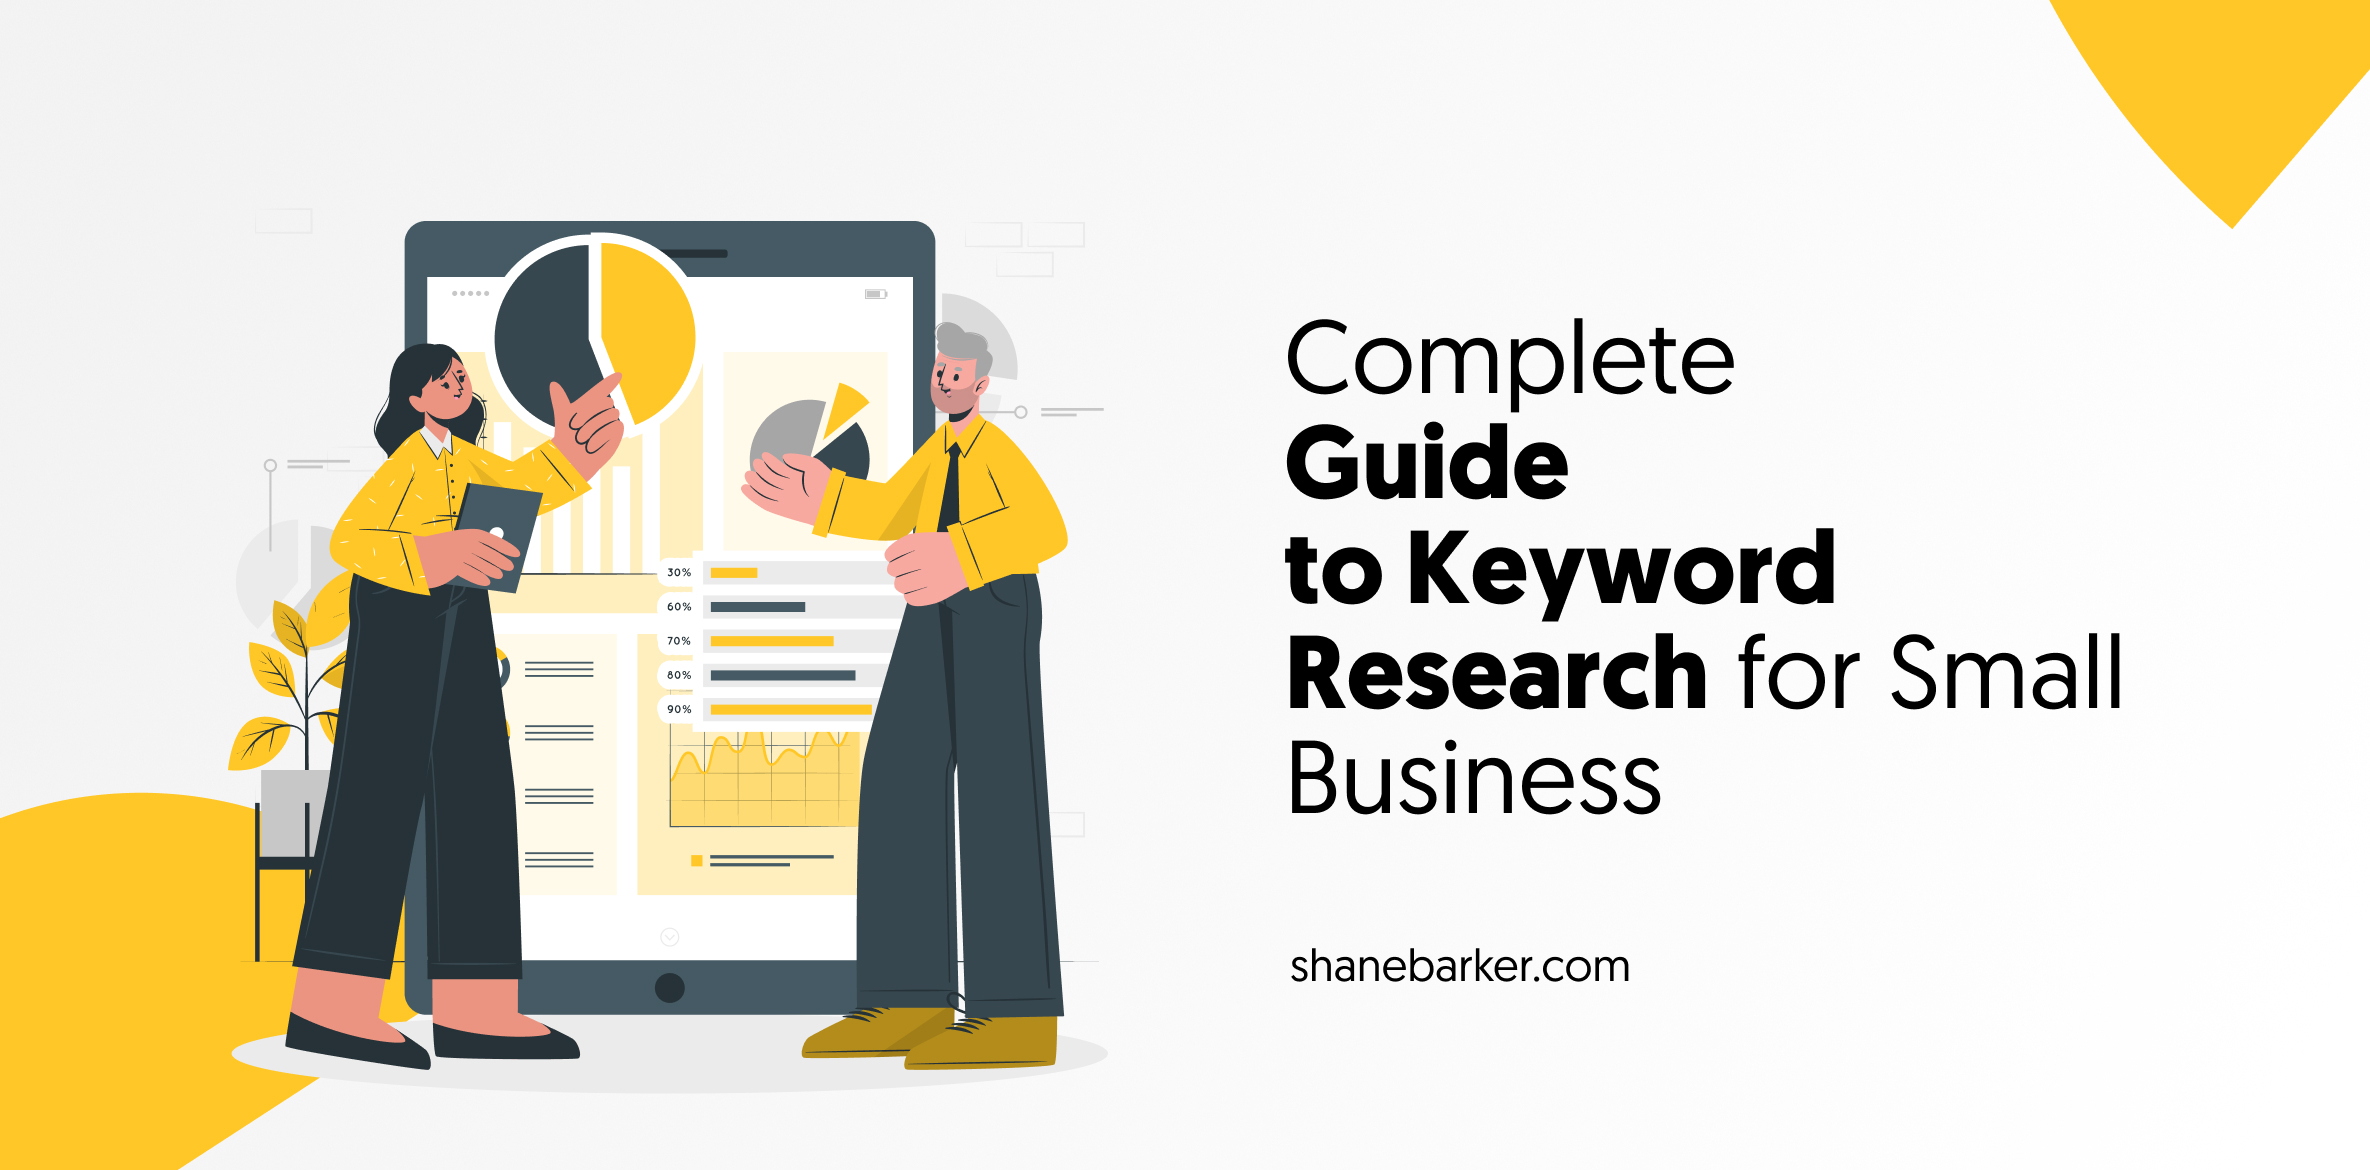 Complete Guide to Keyword Research for Small Business